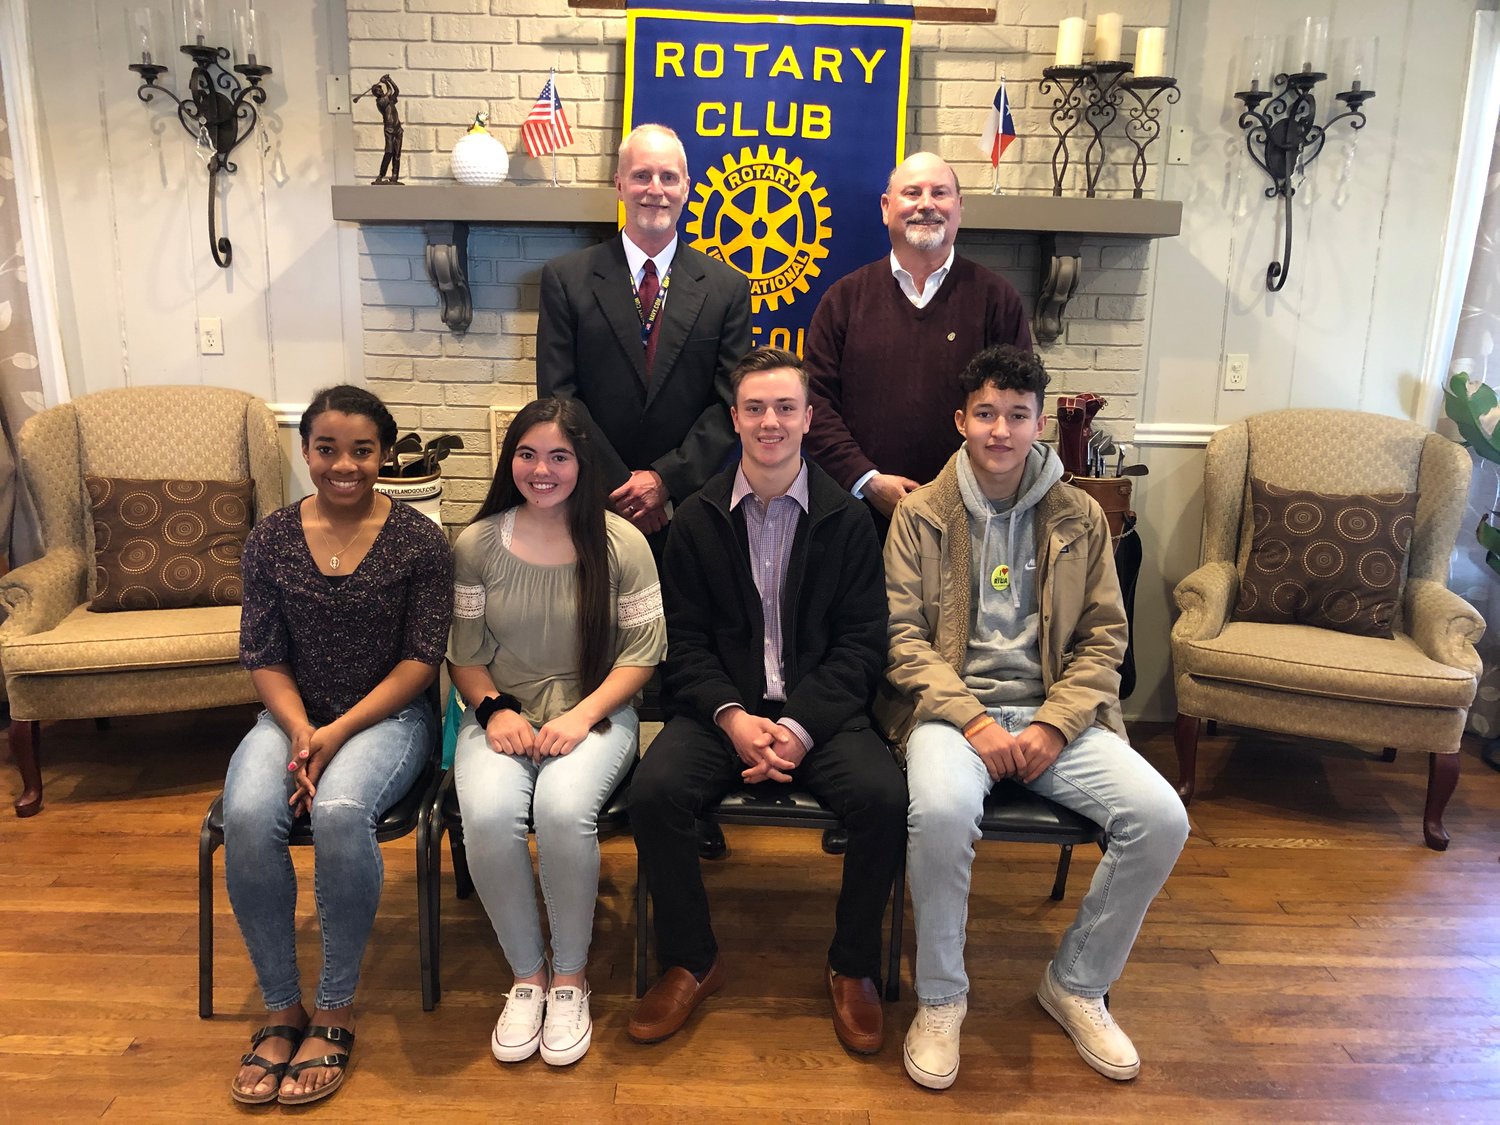 Mineola high school students Abby Kratzmeyer, Alana Galaz, Thomas Hooton and Nathan Rojas attended the Rotary Youth Leadership Awards camp. The students received a scholarship from Mineola Rotary Club to be a part of the dynamic learning opportunity. High school principal David Sauer has been taking students to RYLA for years and has continuously seen the benefits of the camp for the students. Also pictured is Greg Hollen, representative and past president of Mineola Rotary. (Monitor photo by Amanda Duncan)